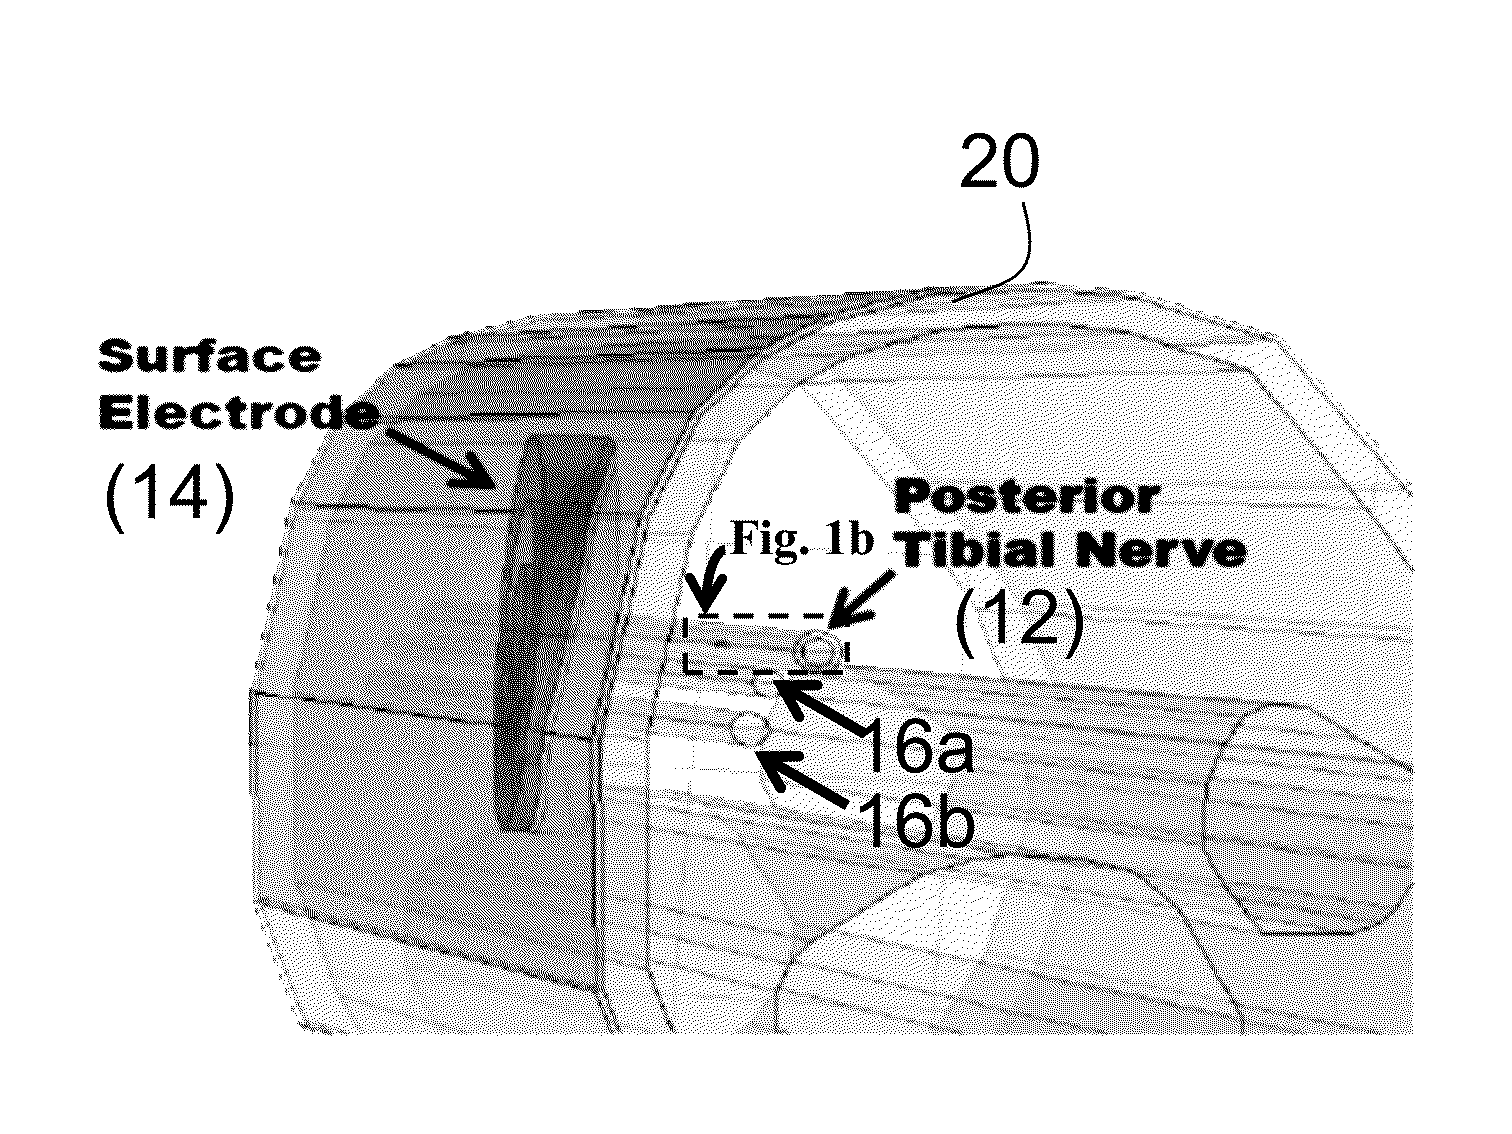 Systems and methods of enhancing electrical activation of nervous tissue